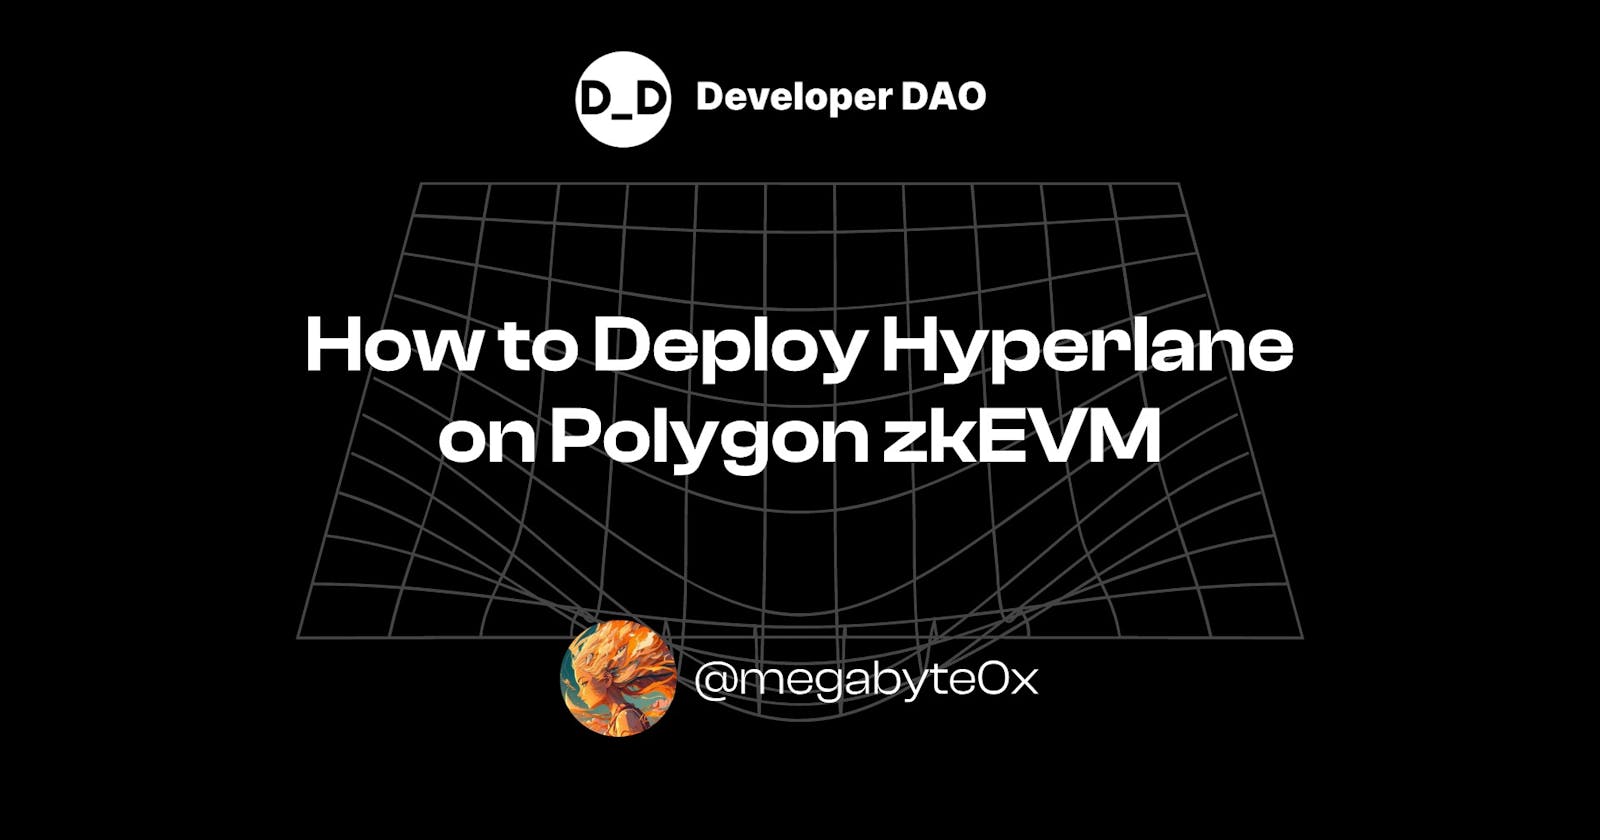 How to Deploy Your Own Hyperlane on Polygon zkEVM